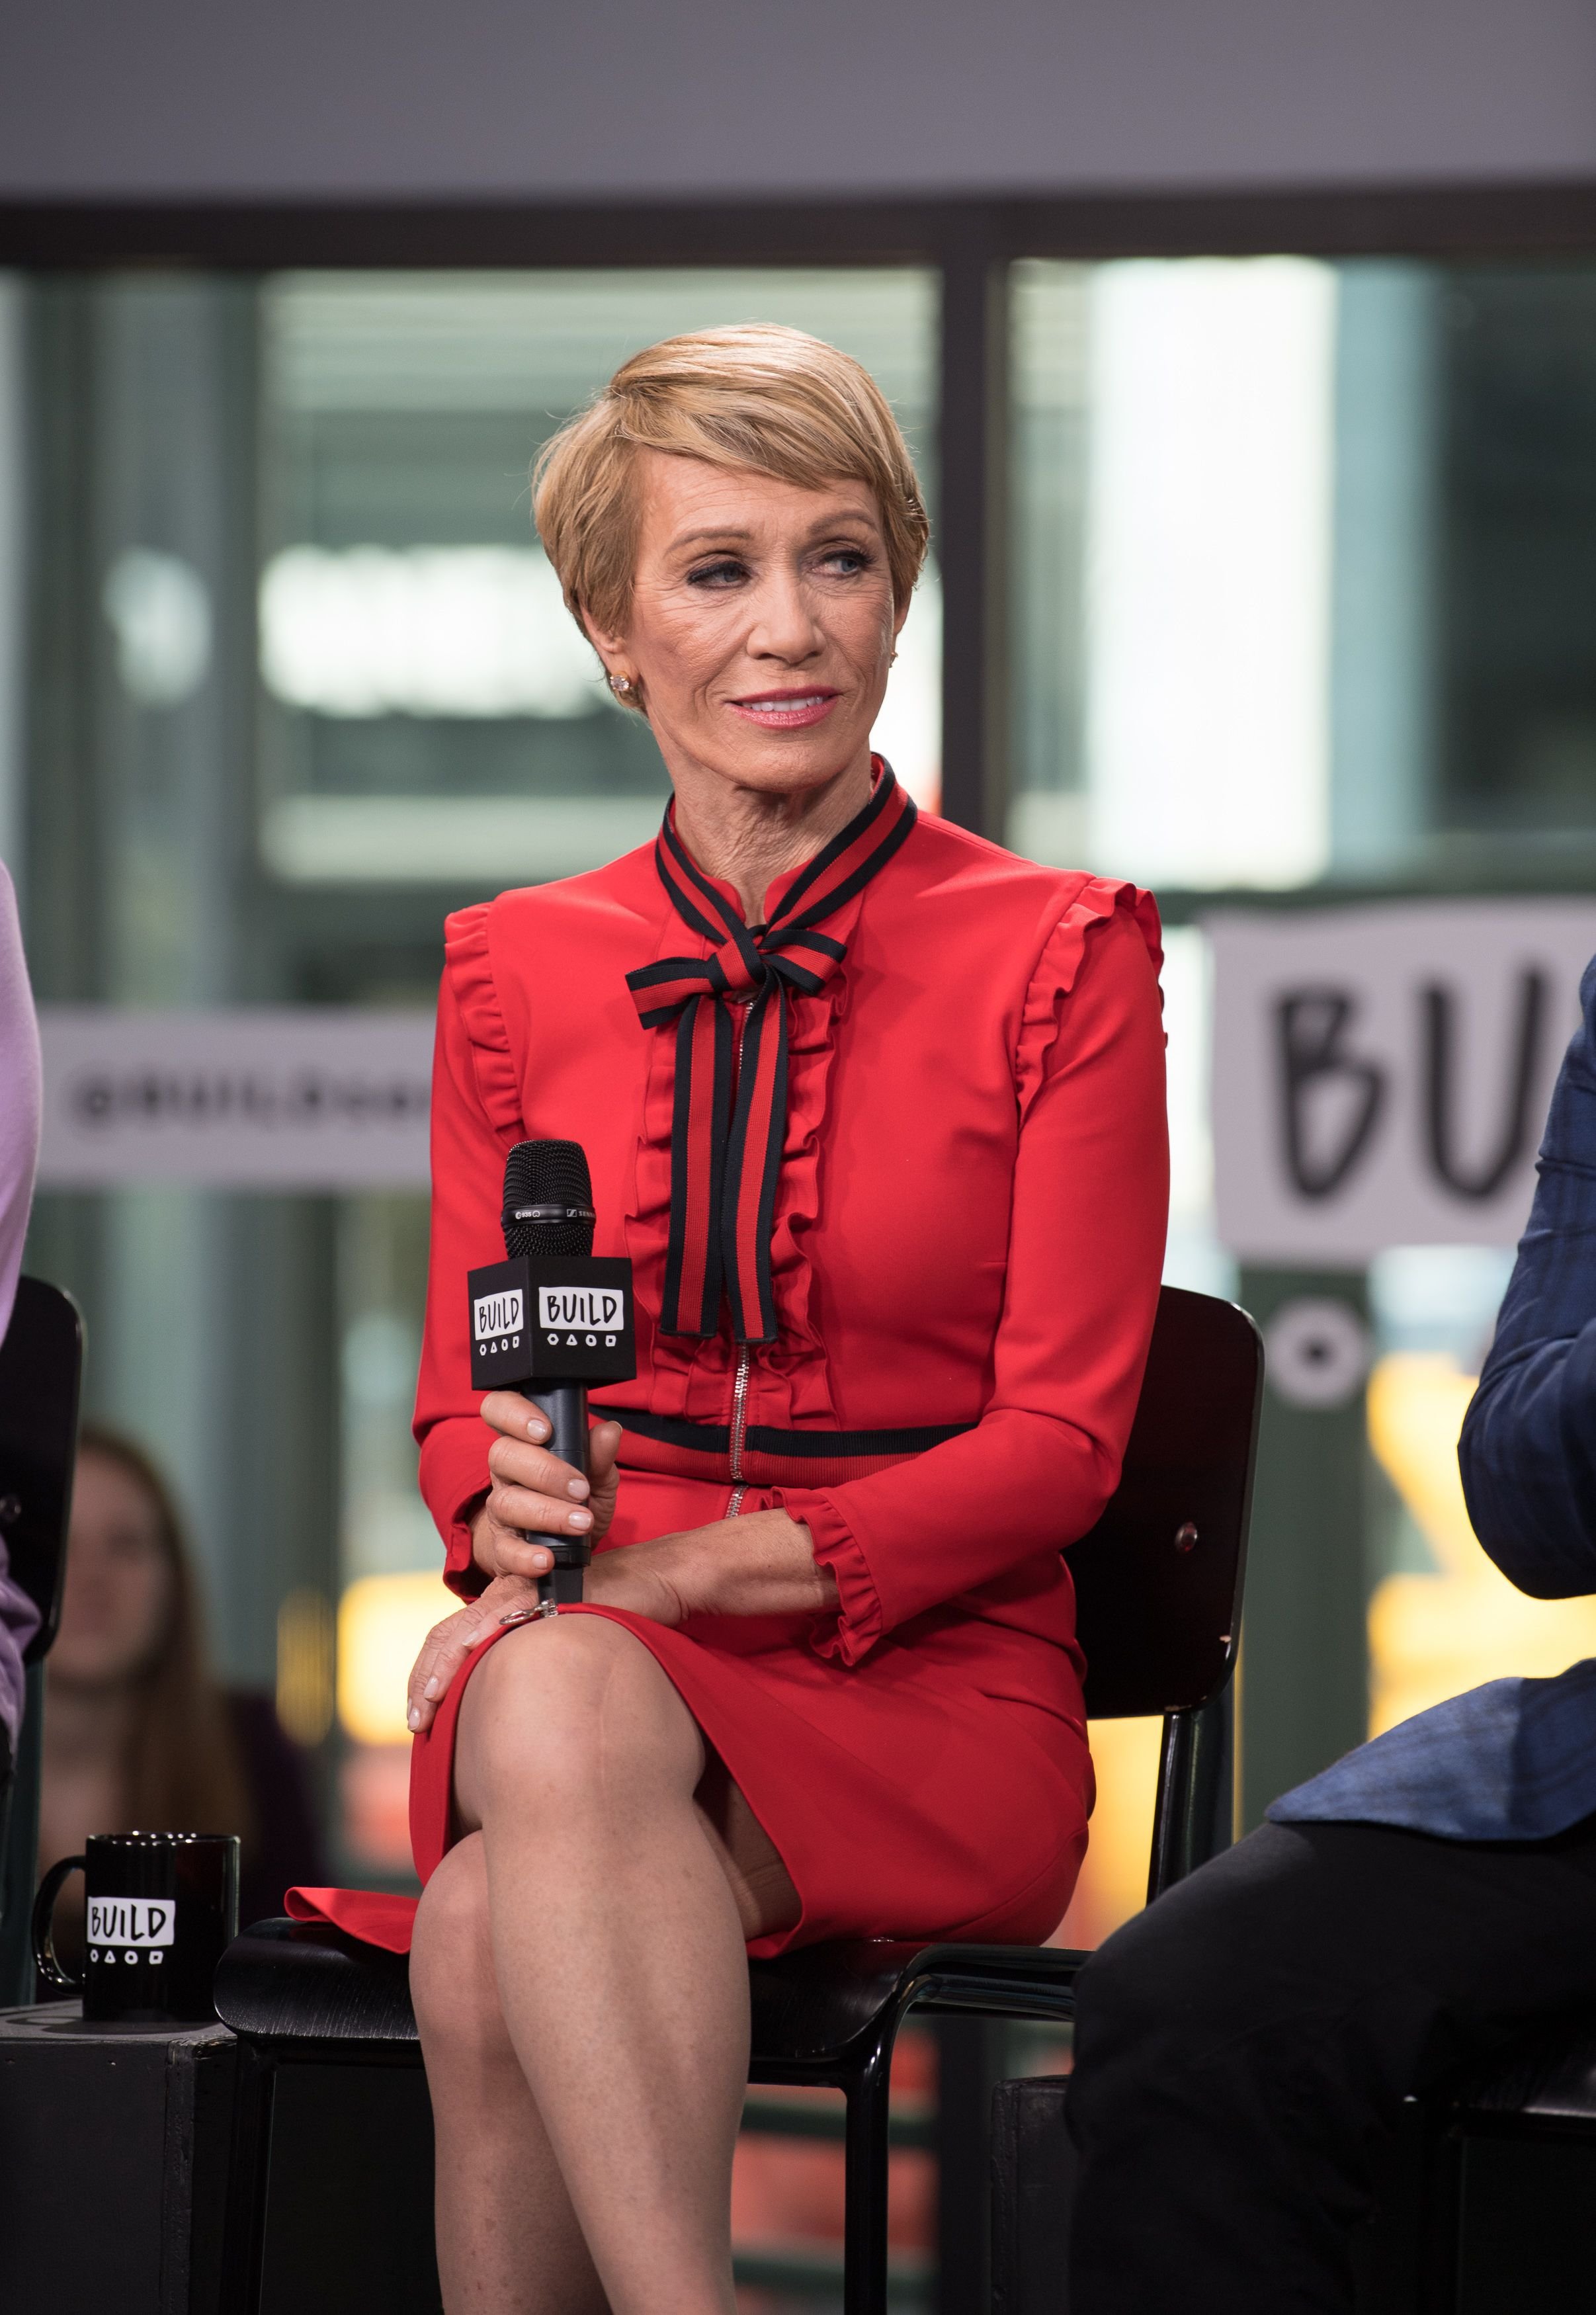 Barbara Corcoran at the Build series to discuss "Shark Tank" at Build Studio in New York City | Photo: Jim Spellman/WireImage via Getty Images